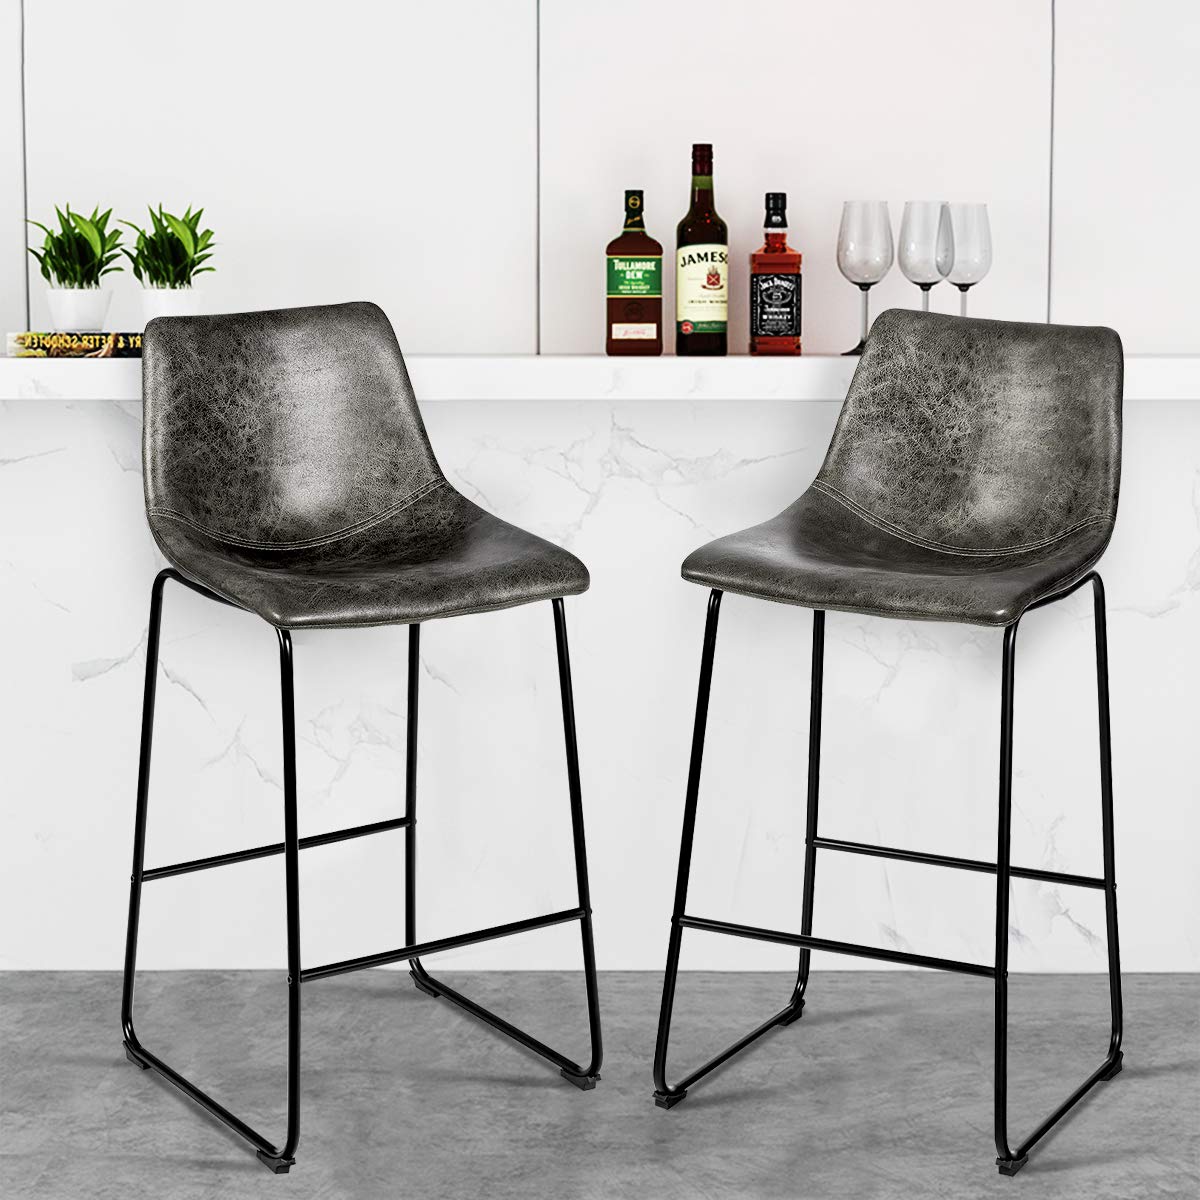 Vintage Faux Suede Bar Stools, with Metal Legs, Back and Footrest